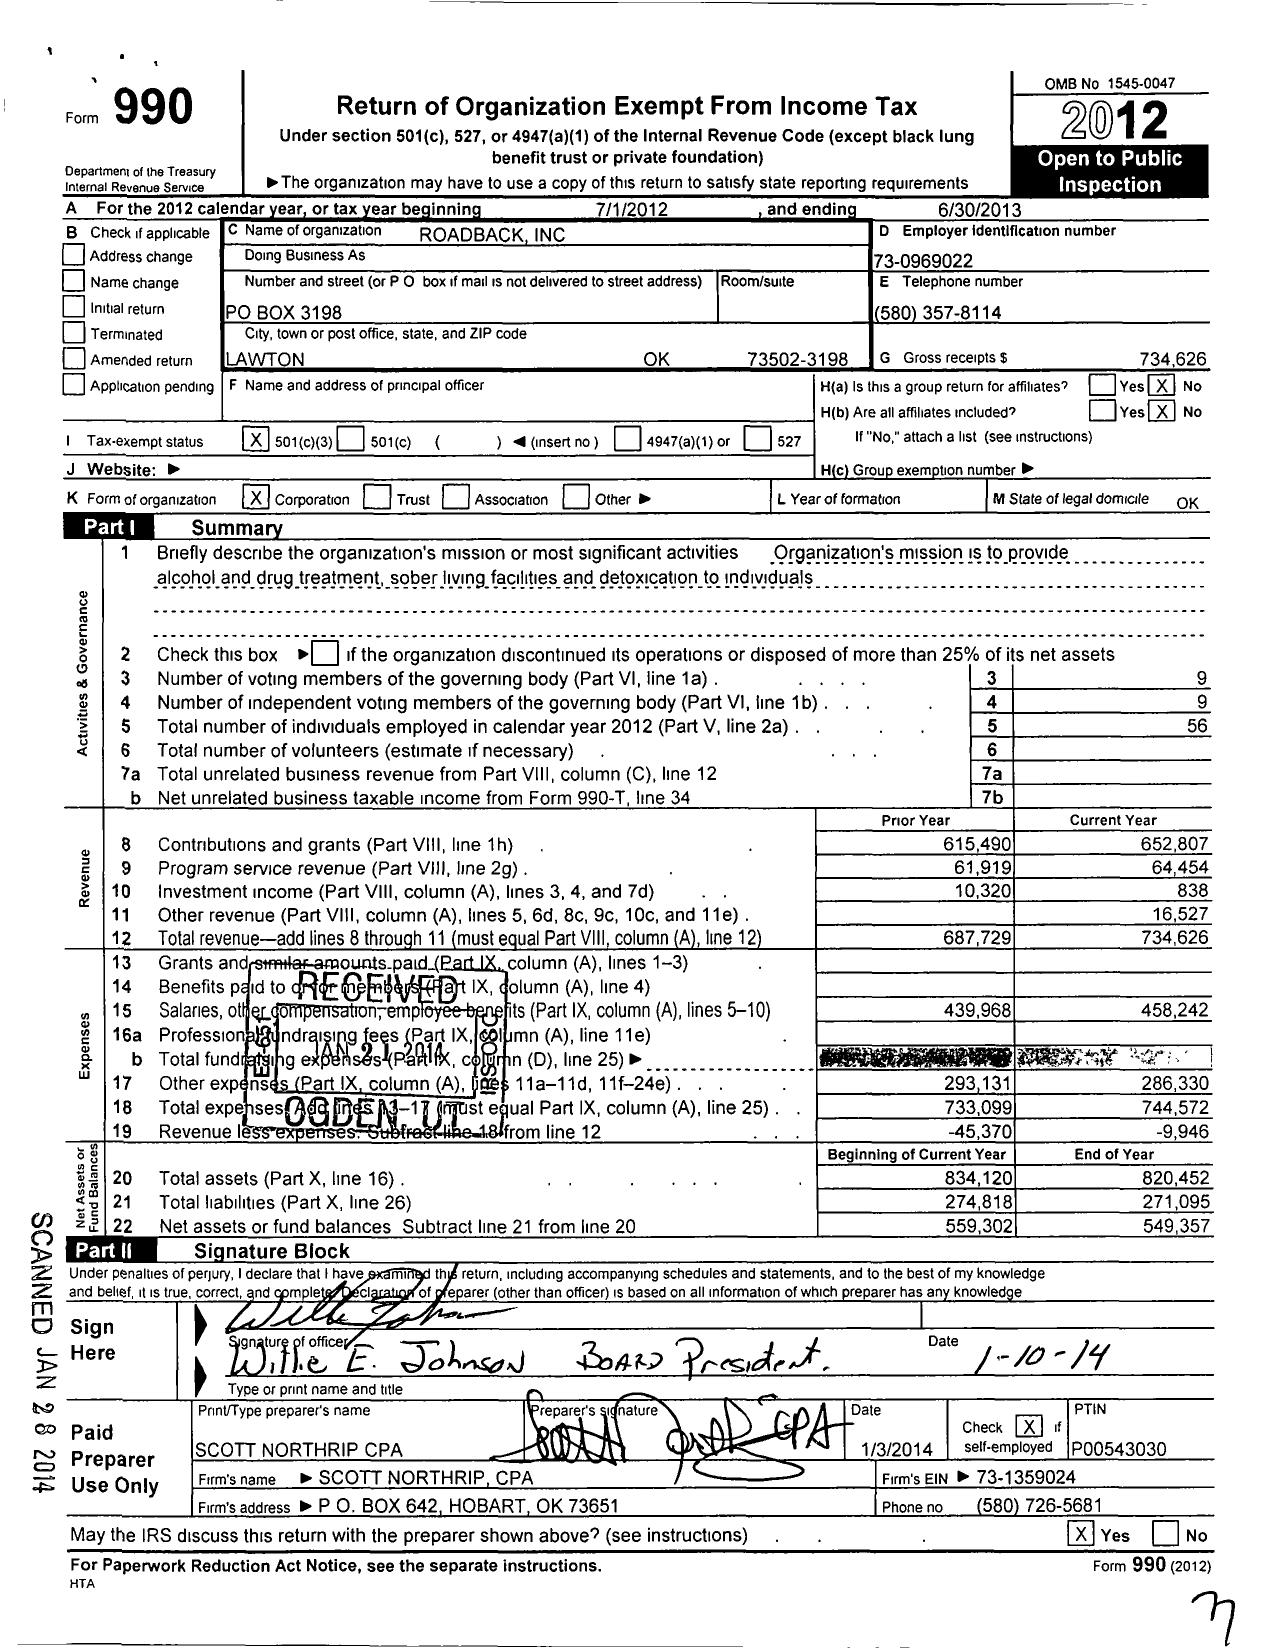 Image of first page of 2012 Form 990 for Roadback